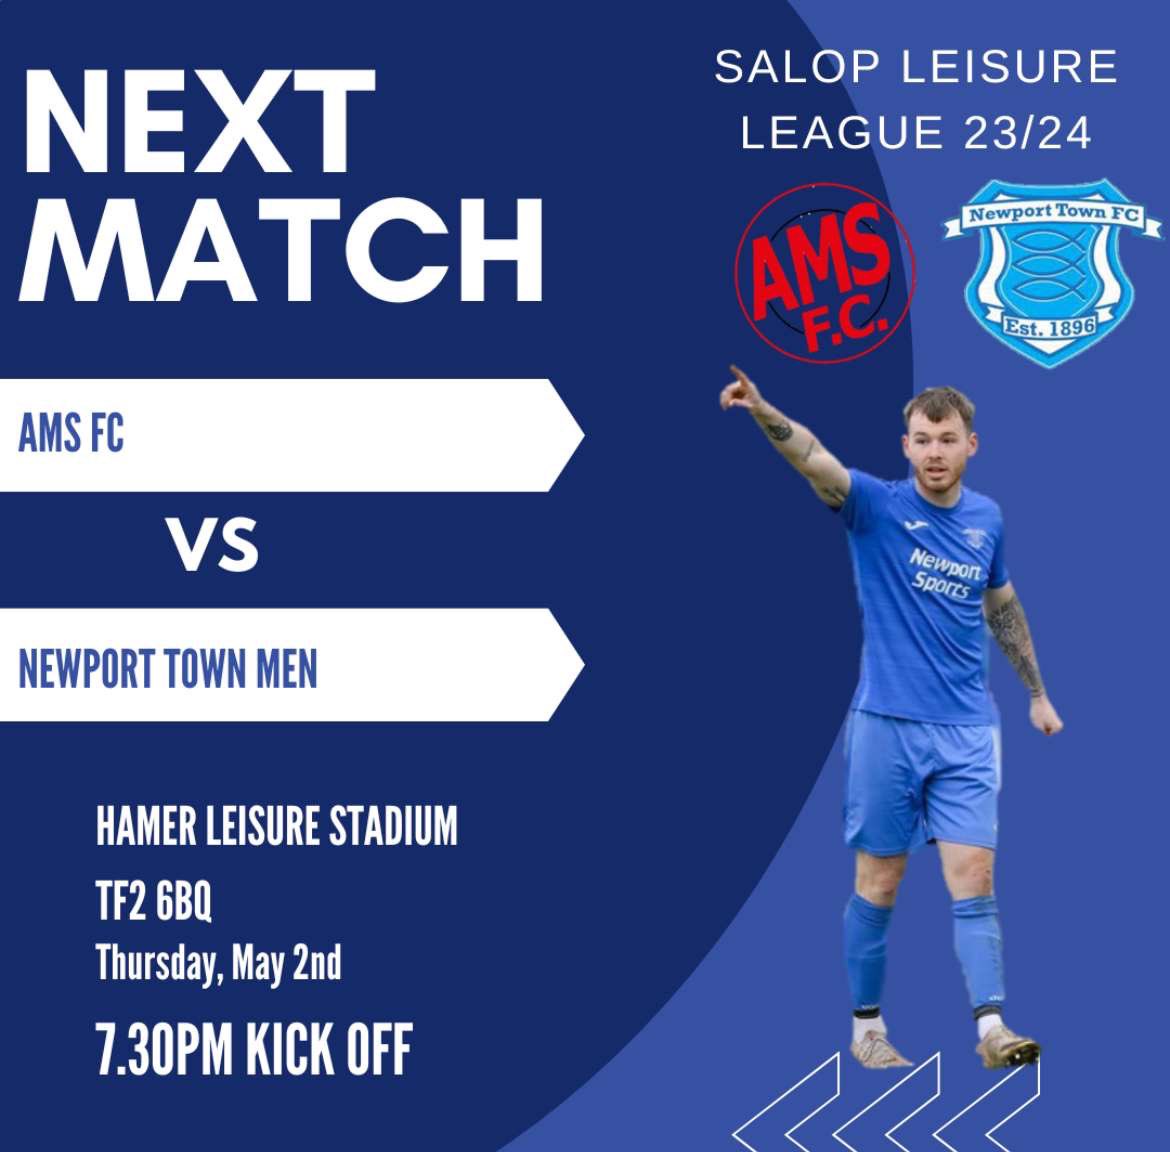 Thursday nights under the lights! This evening our lads face Ams FC, for the second time in 7 days! The lads will be looking to get the double over Ams, after last weeks win. Come down and support the lads! Entry is free! 🐟💙 #UpTheTown #threefishes @NewportTownMens